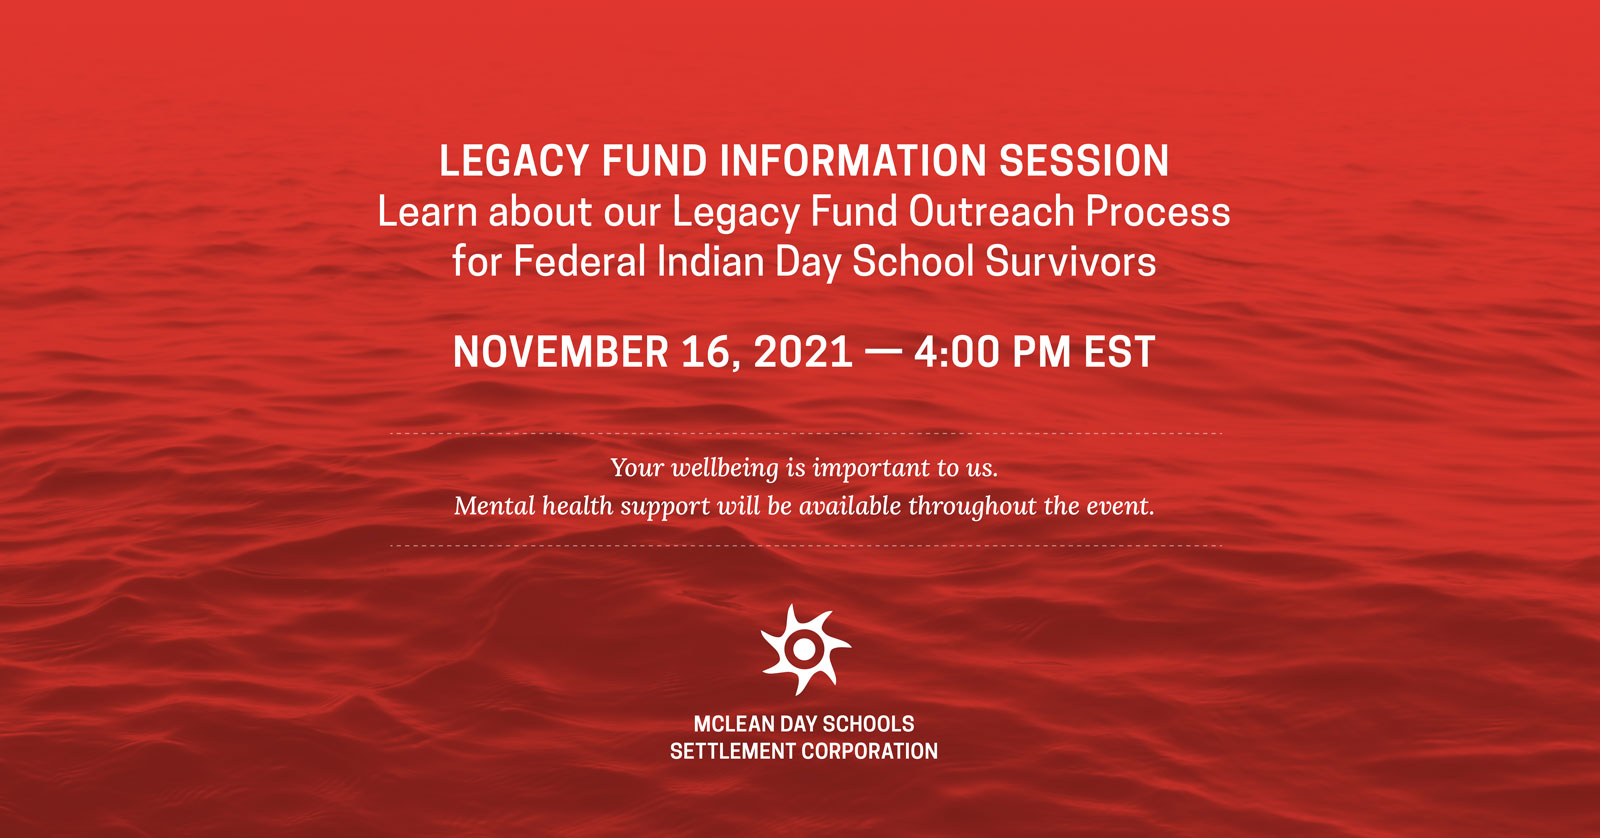 Our Next Legacy Fund Information Session Is Coming Soon!